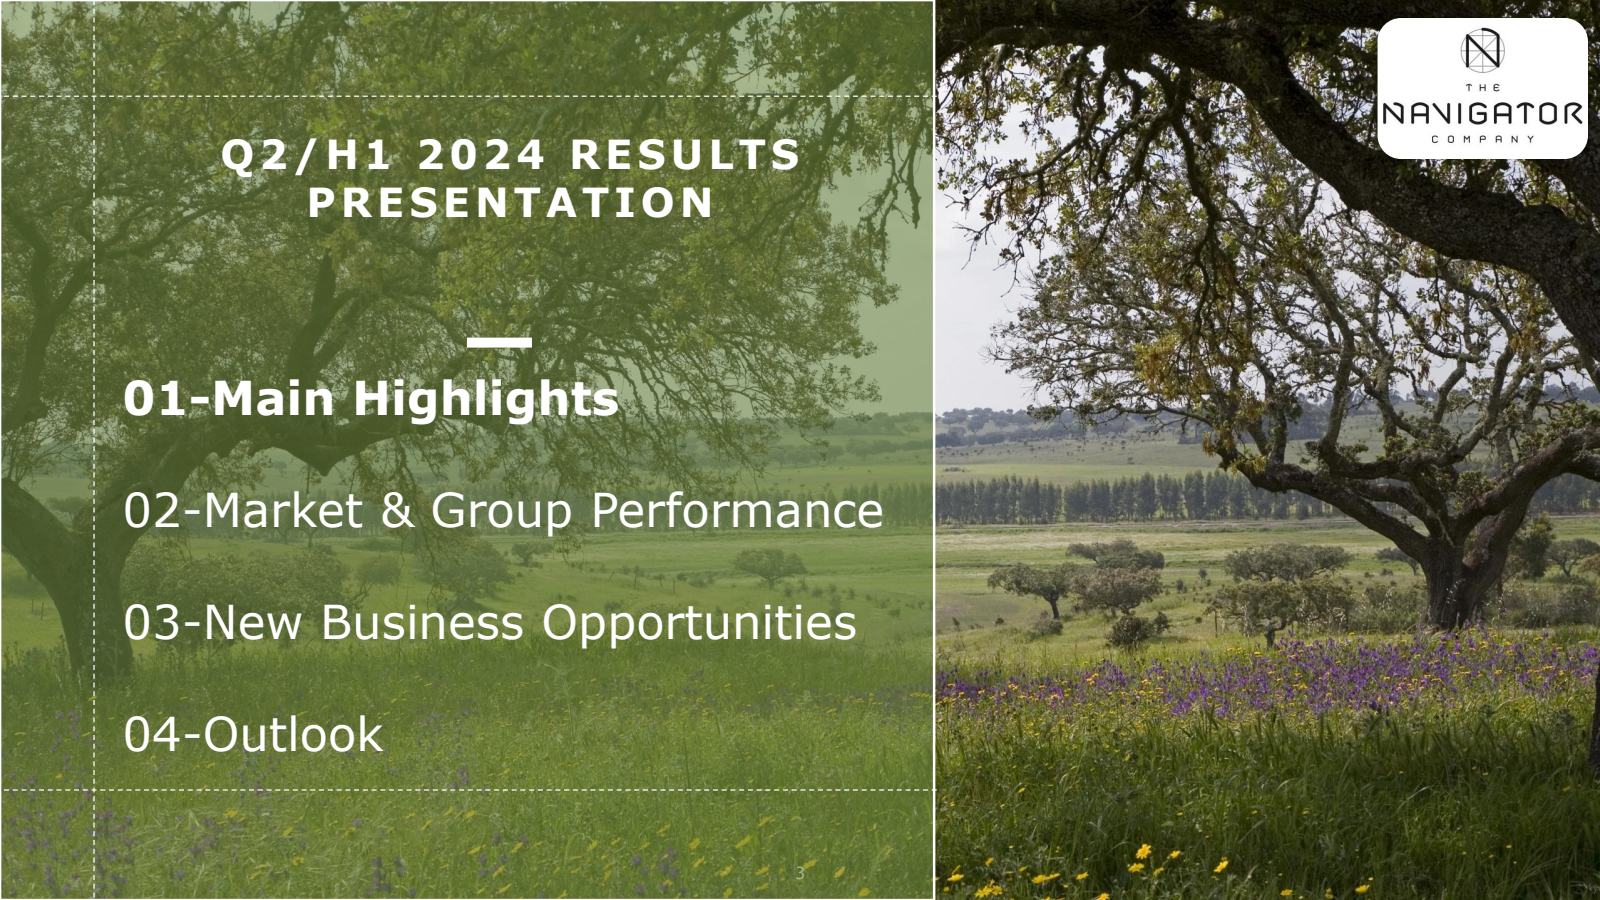 Q2 / H1 2024 RESULTS